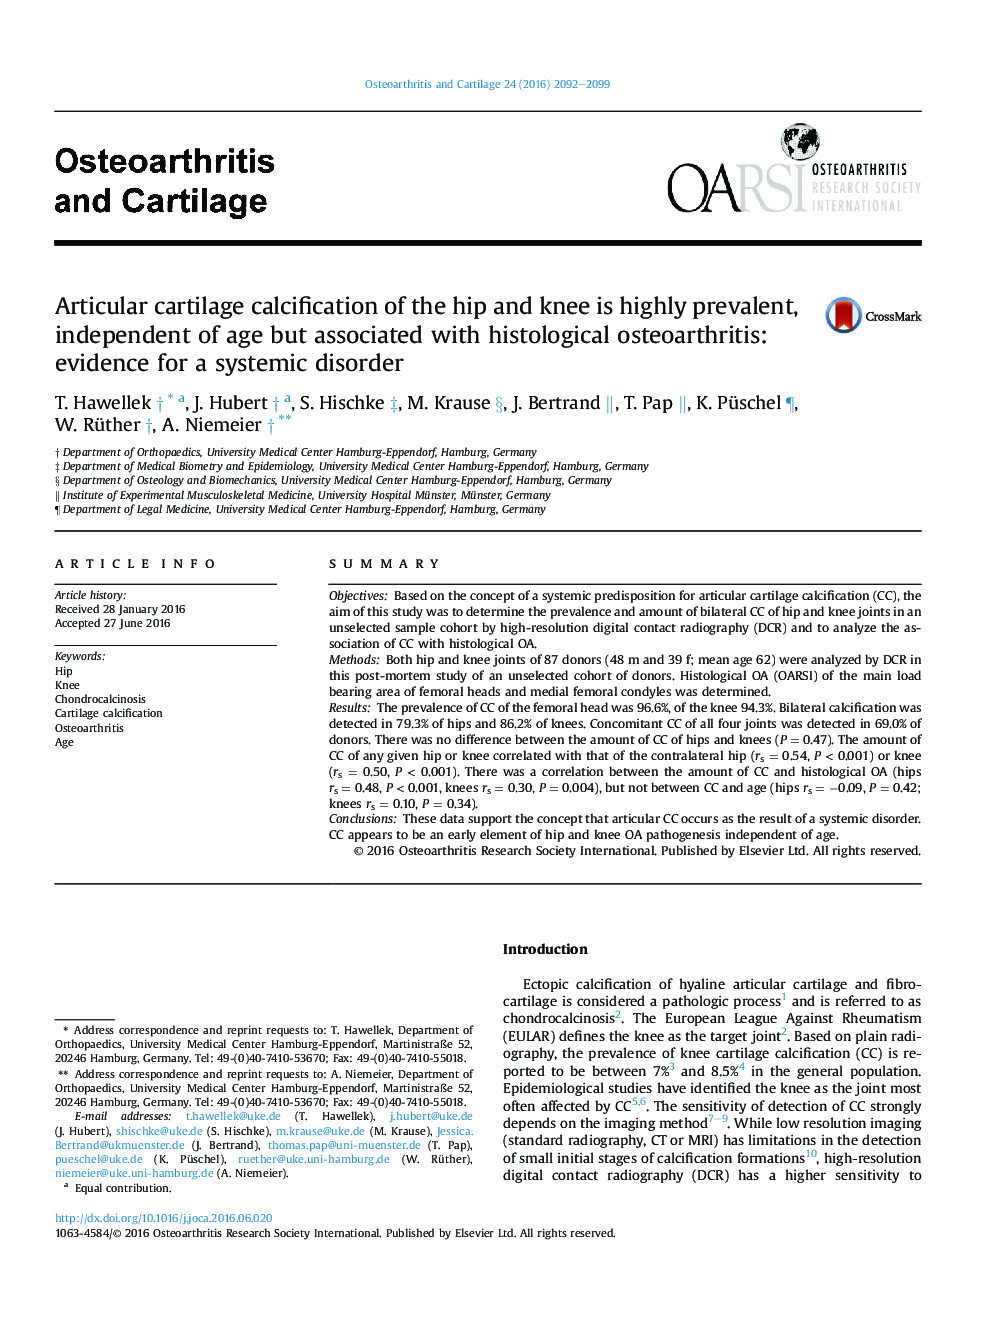 Articular cartilage calcification of the hip and knee is highly prevalent, independent of age but associated with histological osteoarthritis: evidence for a systemic disorder